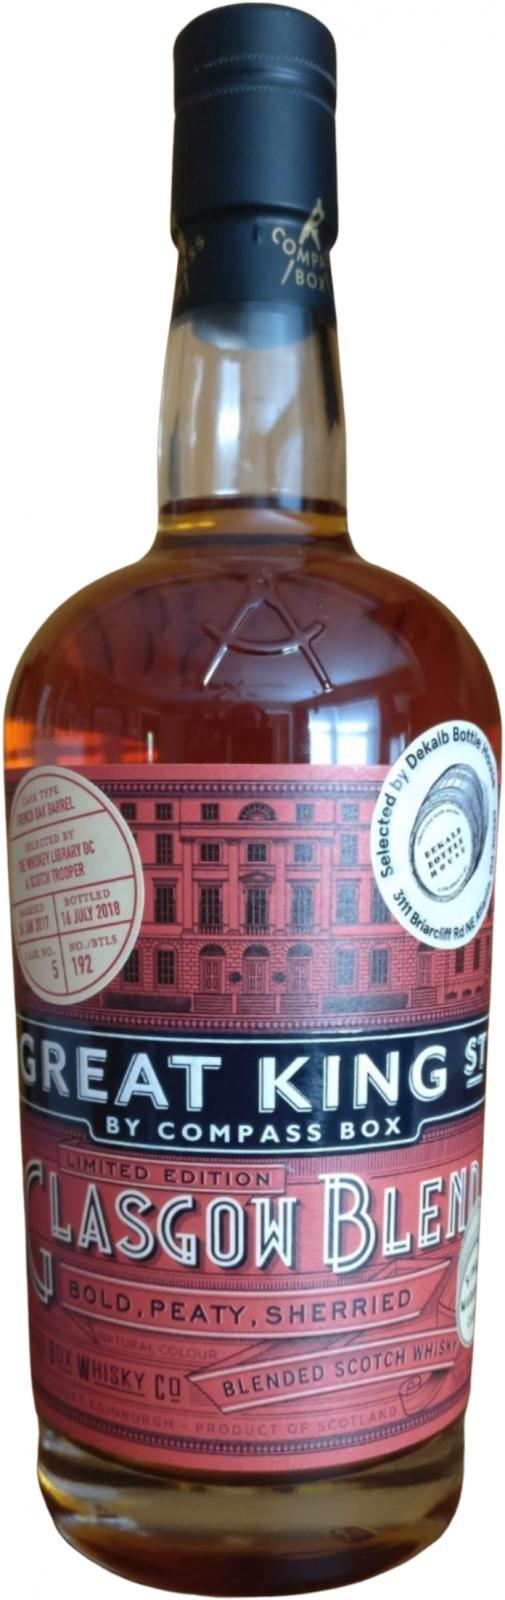 Great King Street Glasgow Blend Single Marrying Cask Limited Edition French oak barrel The Whiskey library & Scotch Trooper 49% 750ml